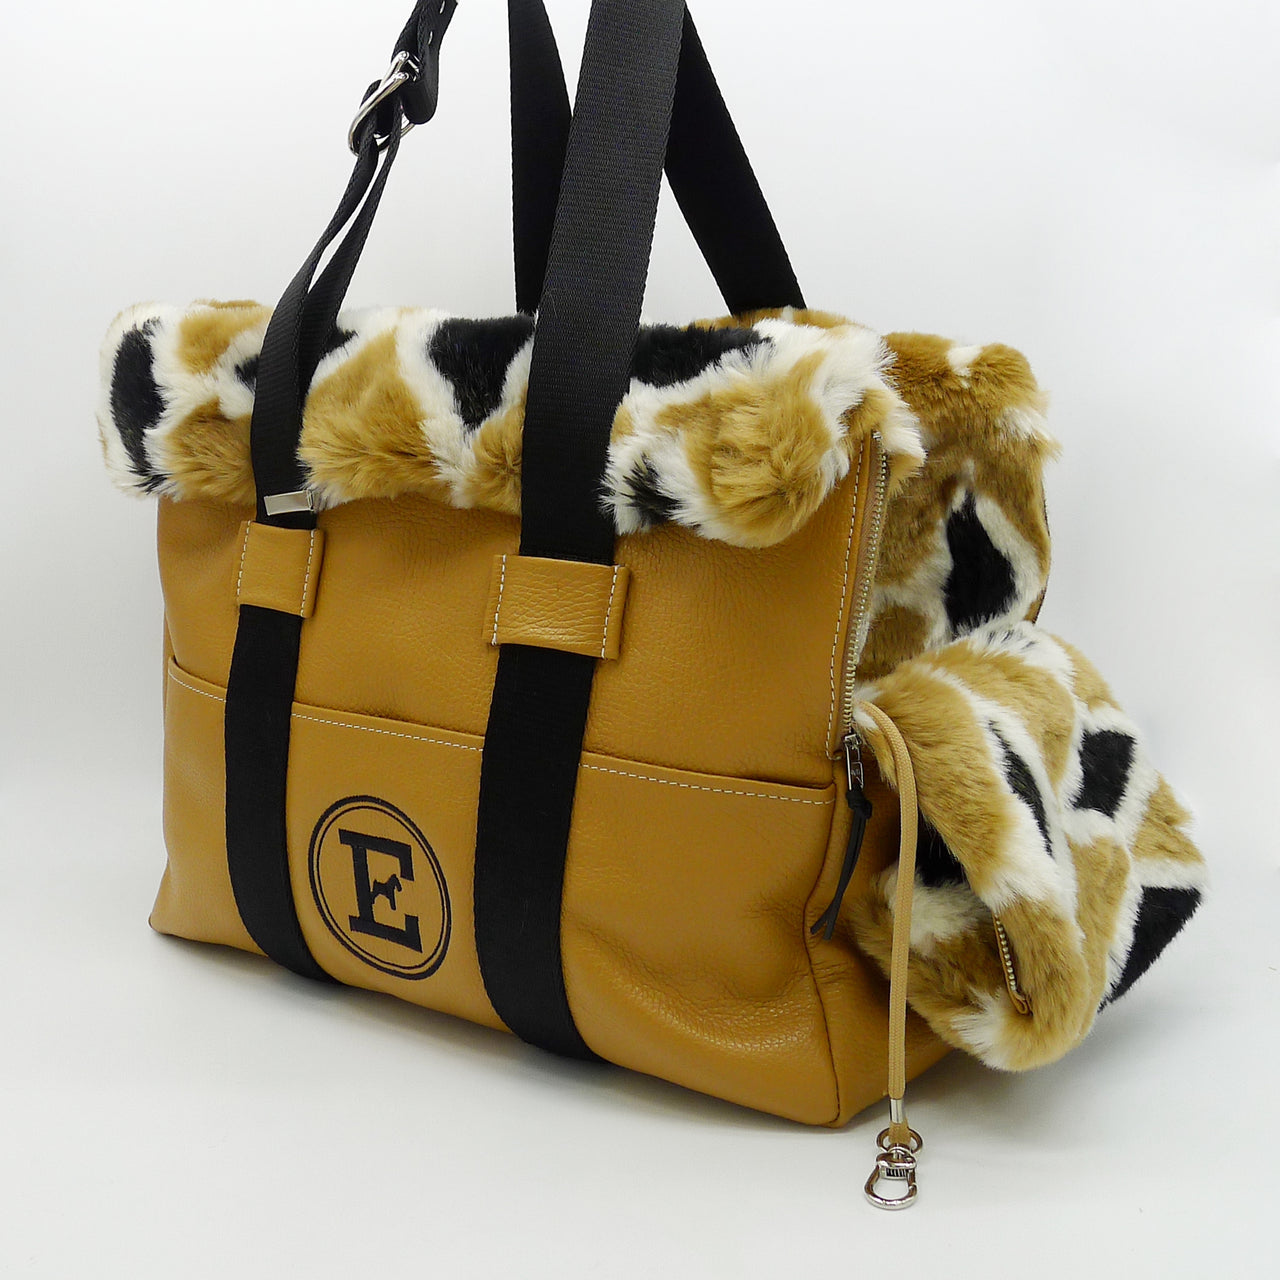 Dachshund Carry Bag with Fur